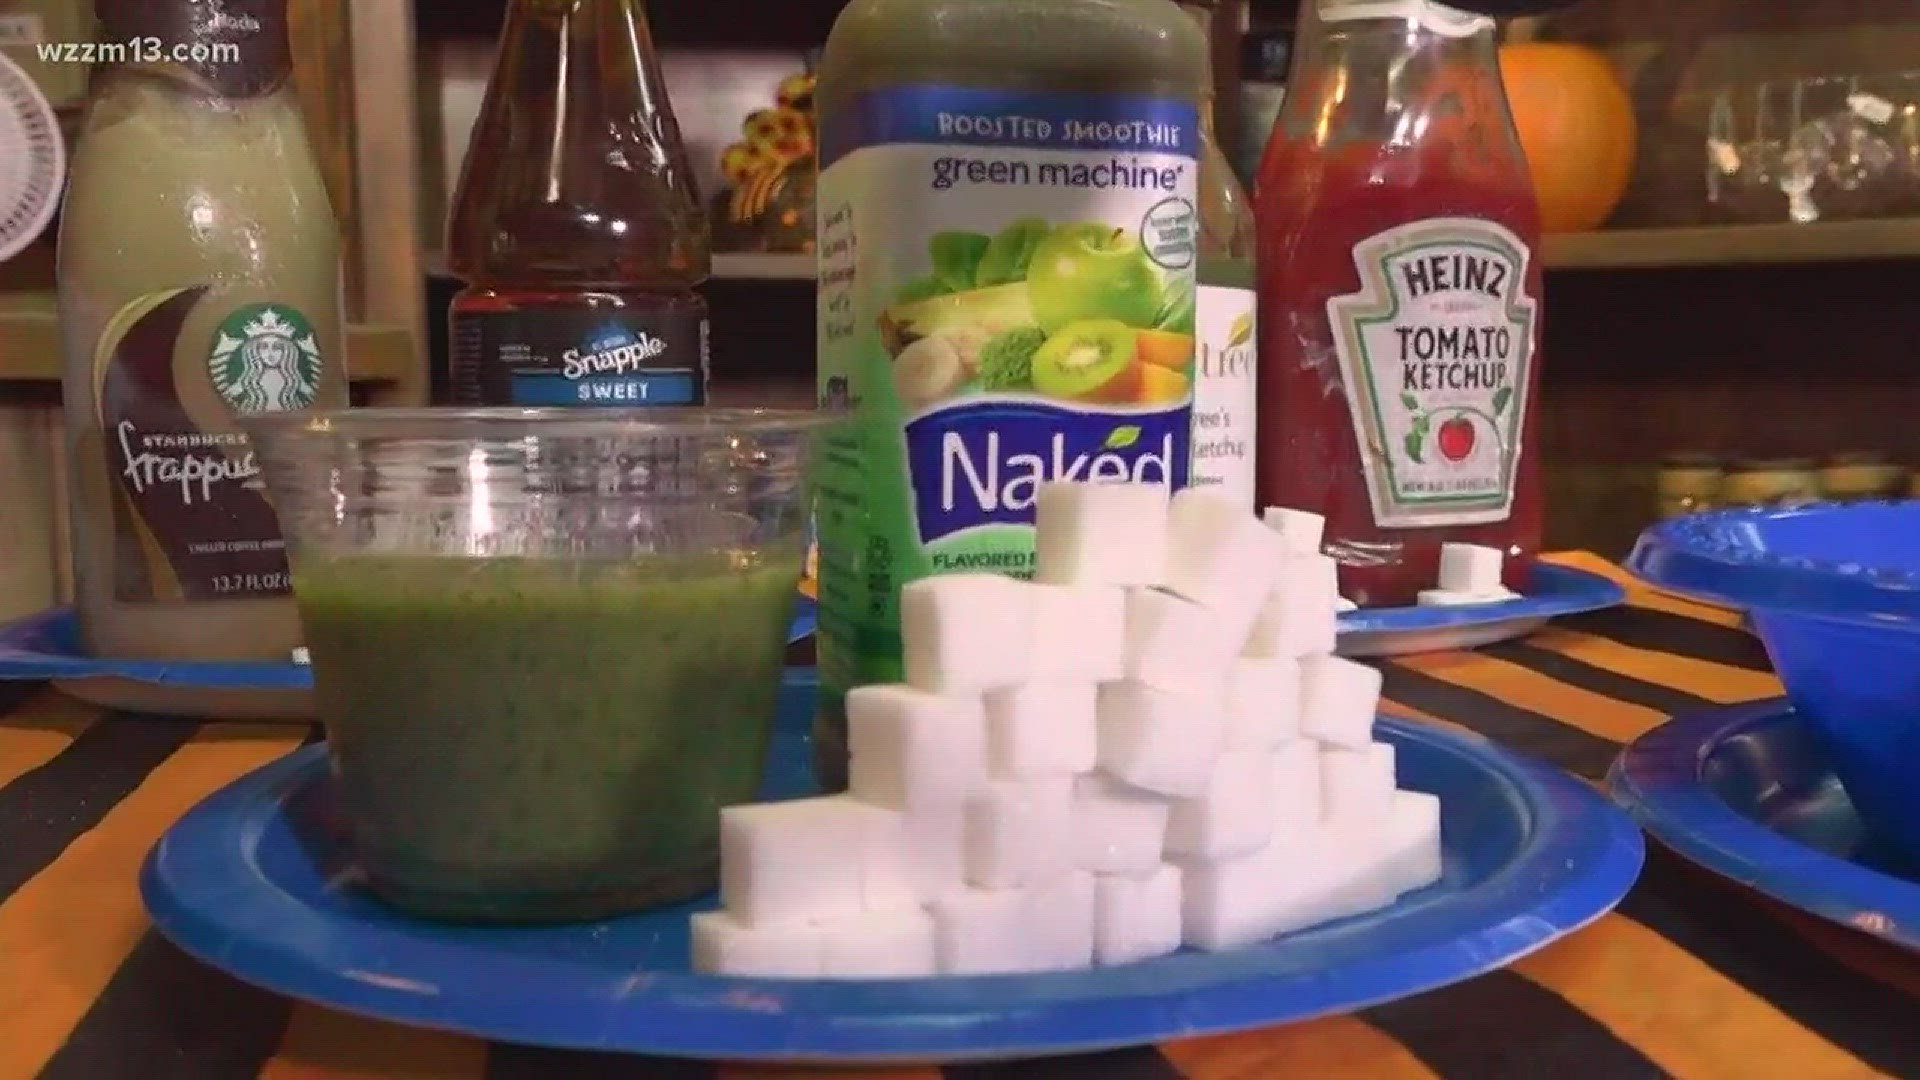 Blue Cross Blue Shields shares green smoothies